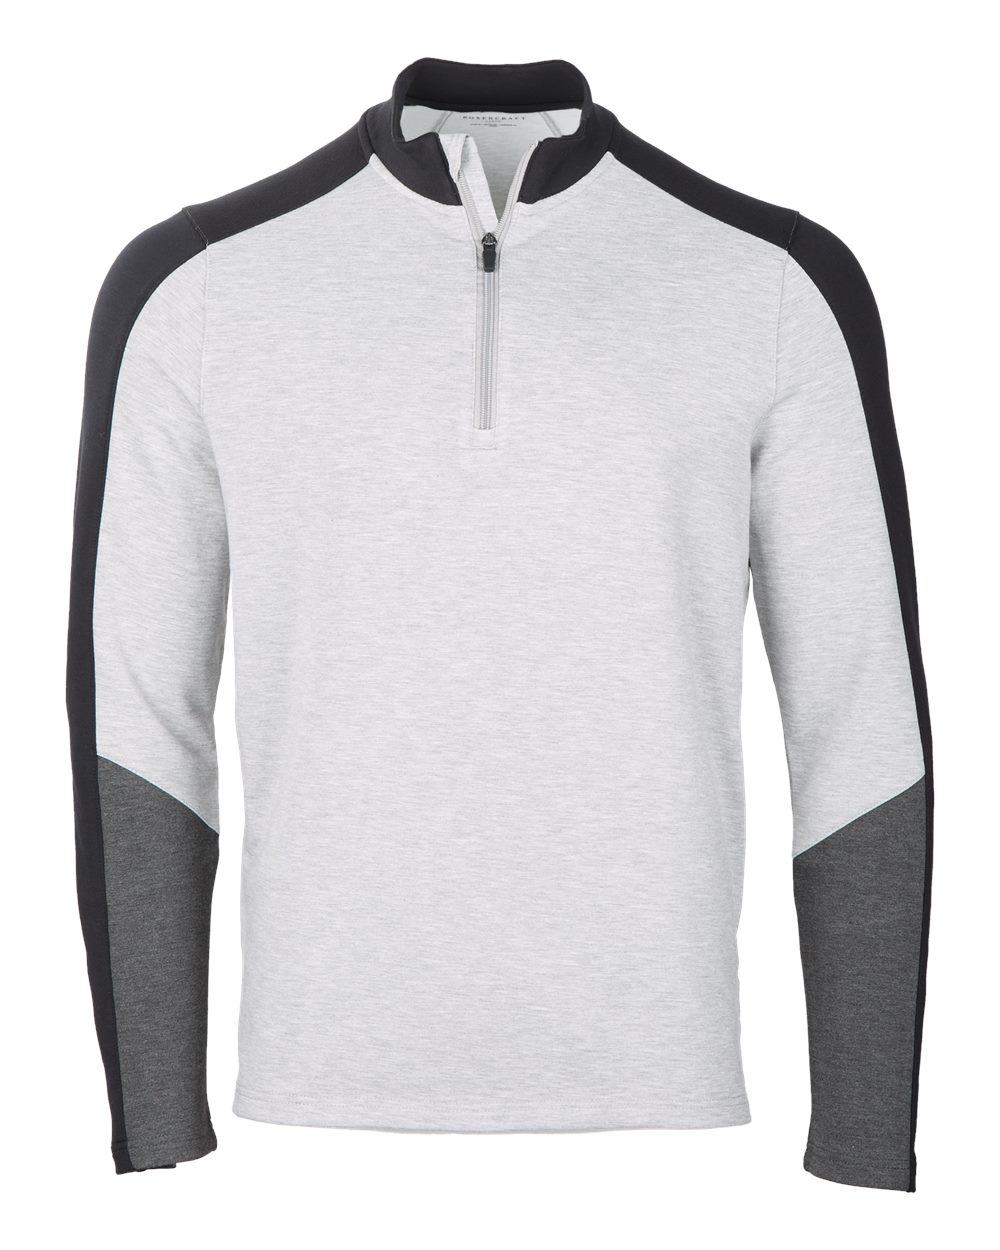 click to view Oxford/ Black/ Charcoal Heather